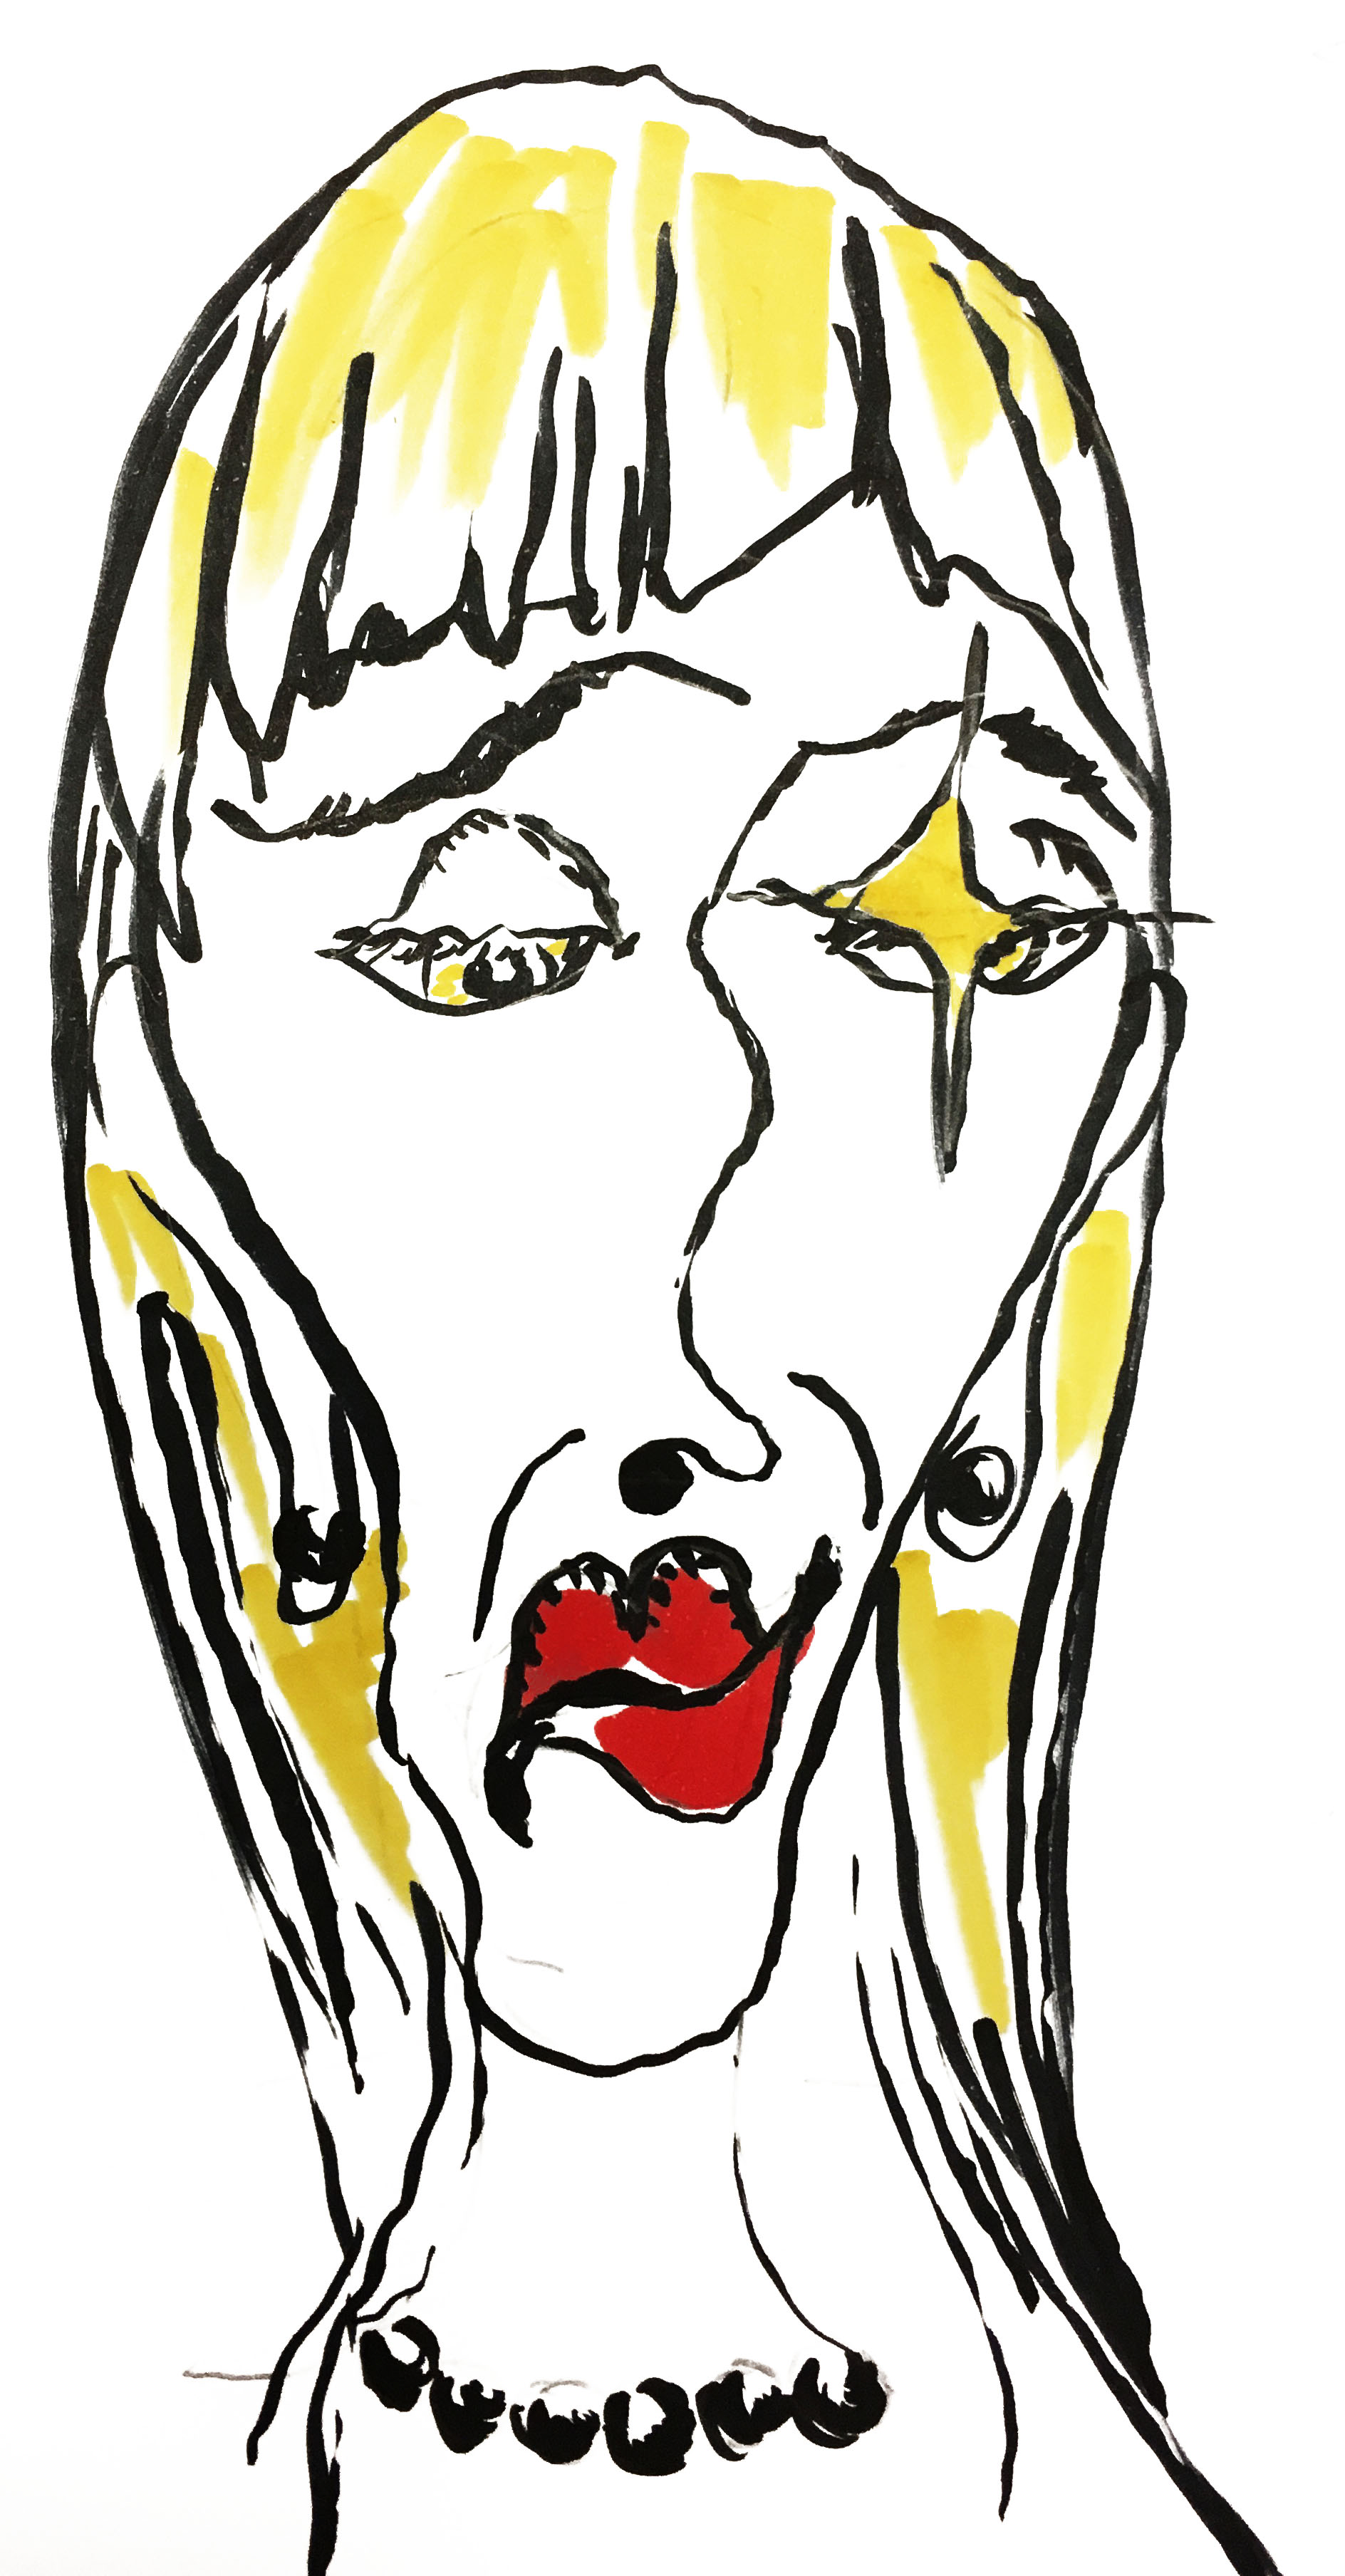 caricature of blonde woman with red lipstick and a twinkle in her eye